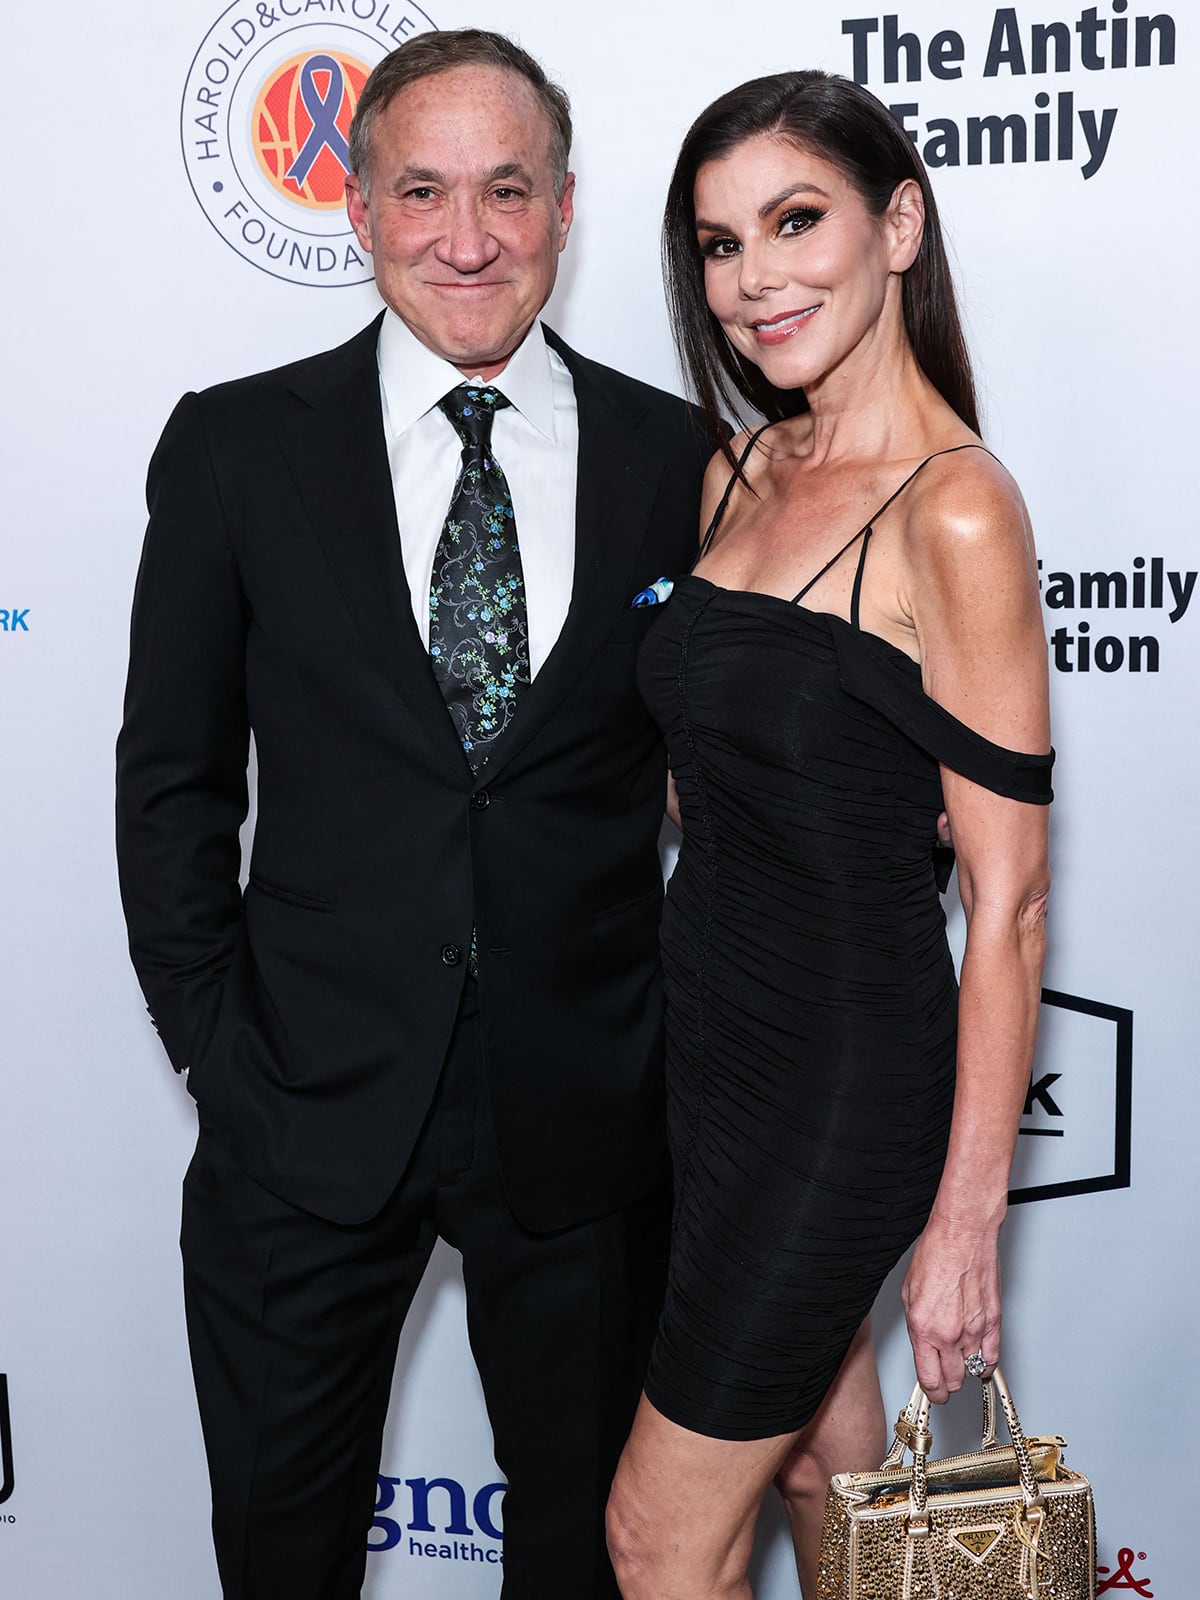 Heather Dubrow is married to Dr. Terry Dubrow, a famed plastic surgeon and TV personality